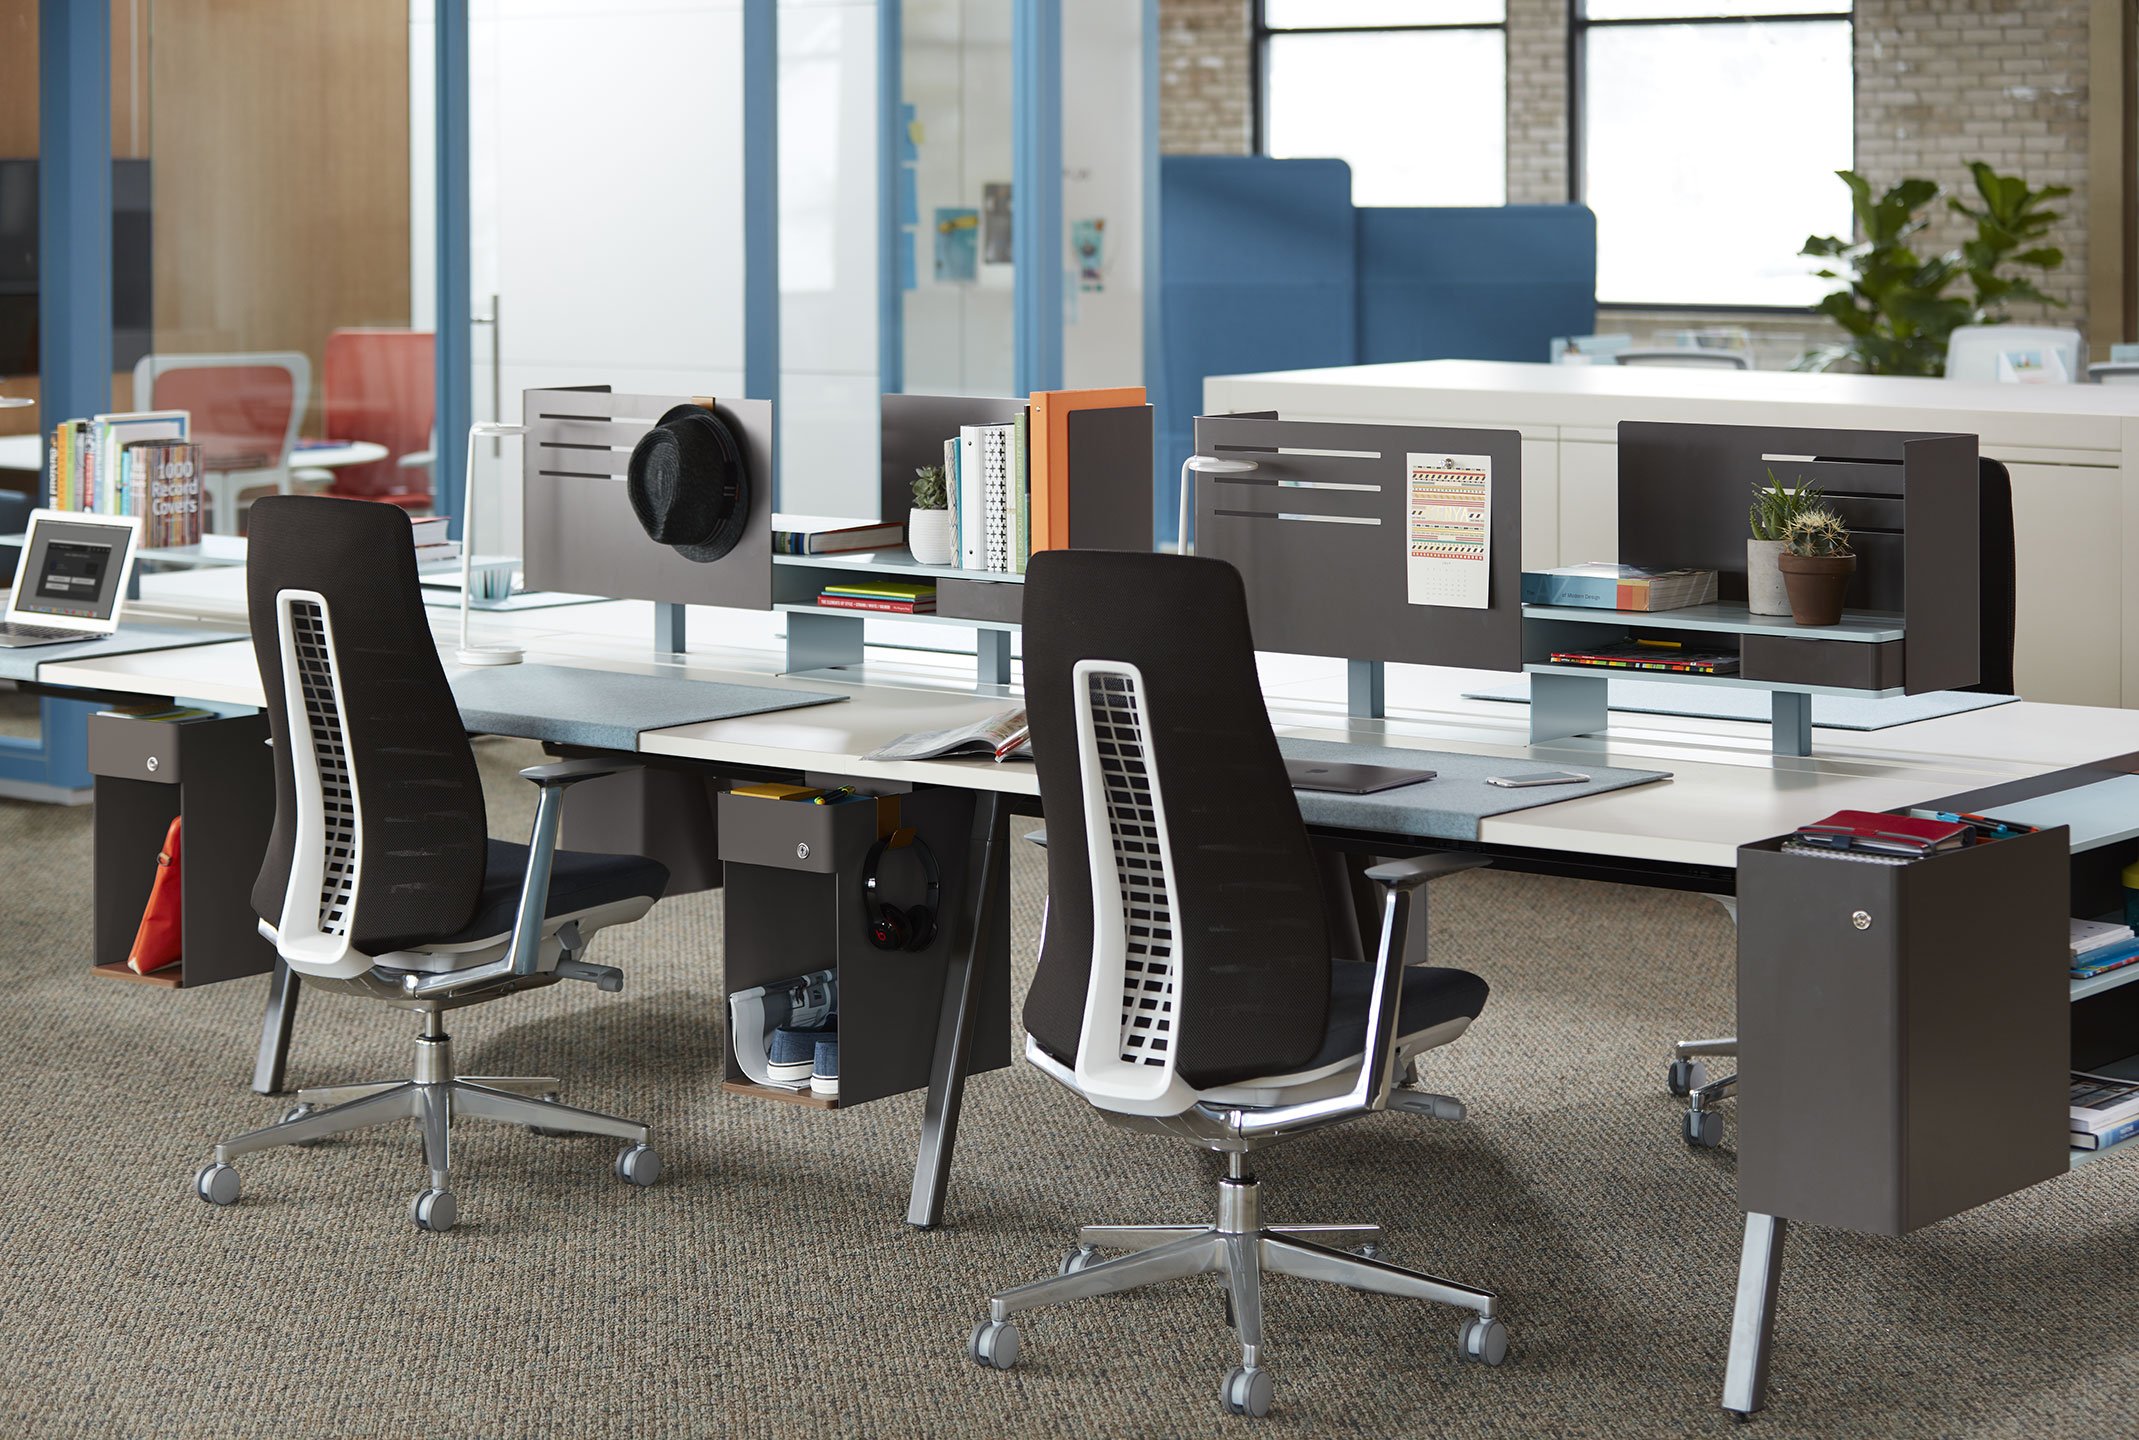 Haworth Fern task chairs in black upholstery placed in a serial workstation space on a office floor